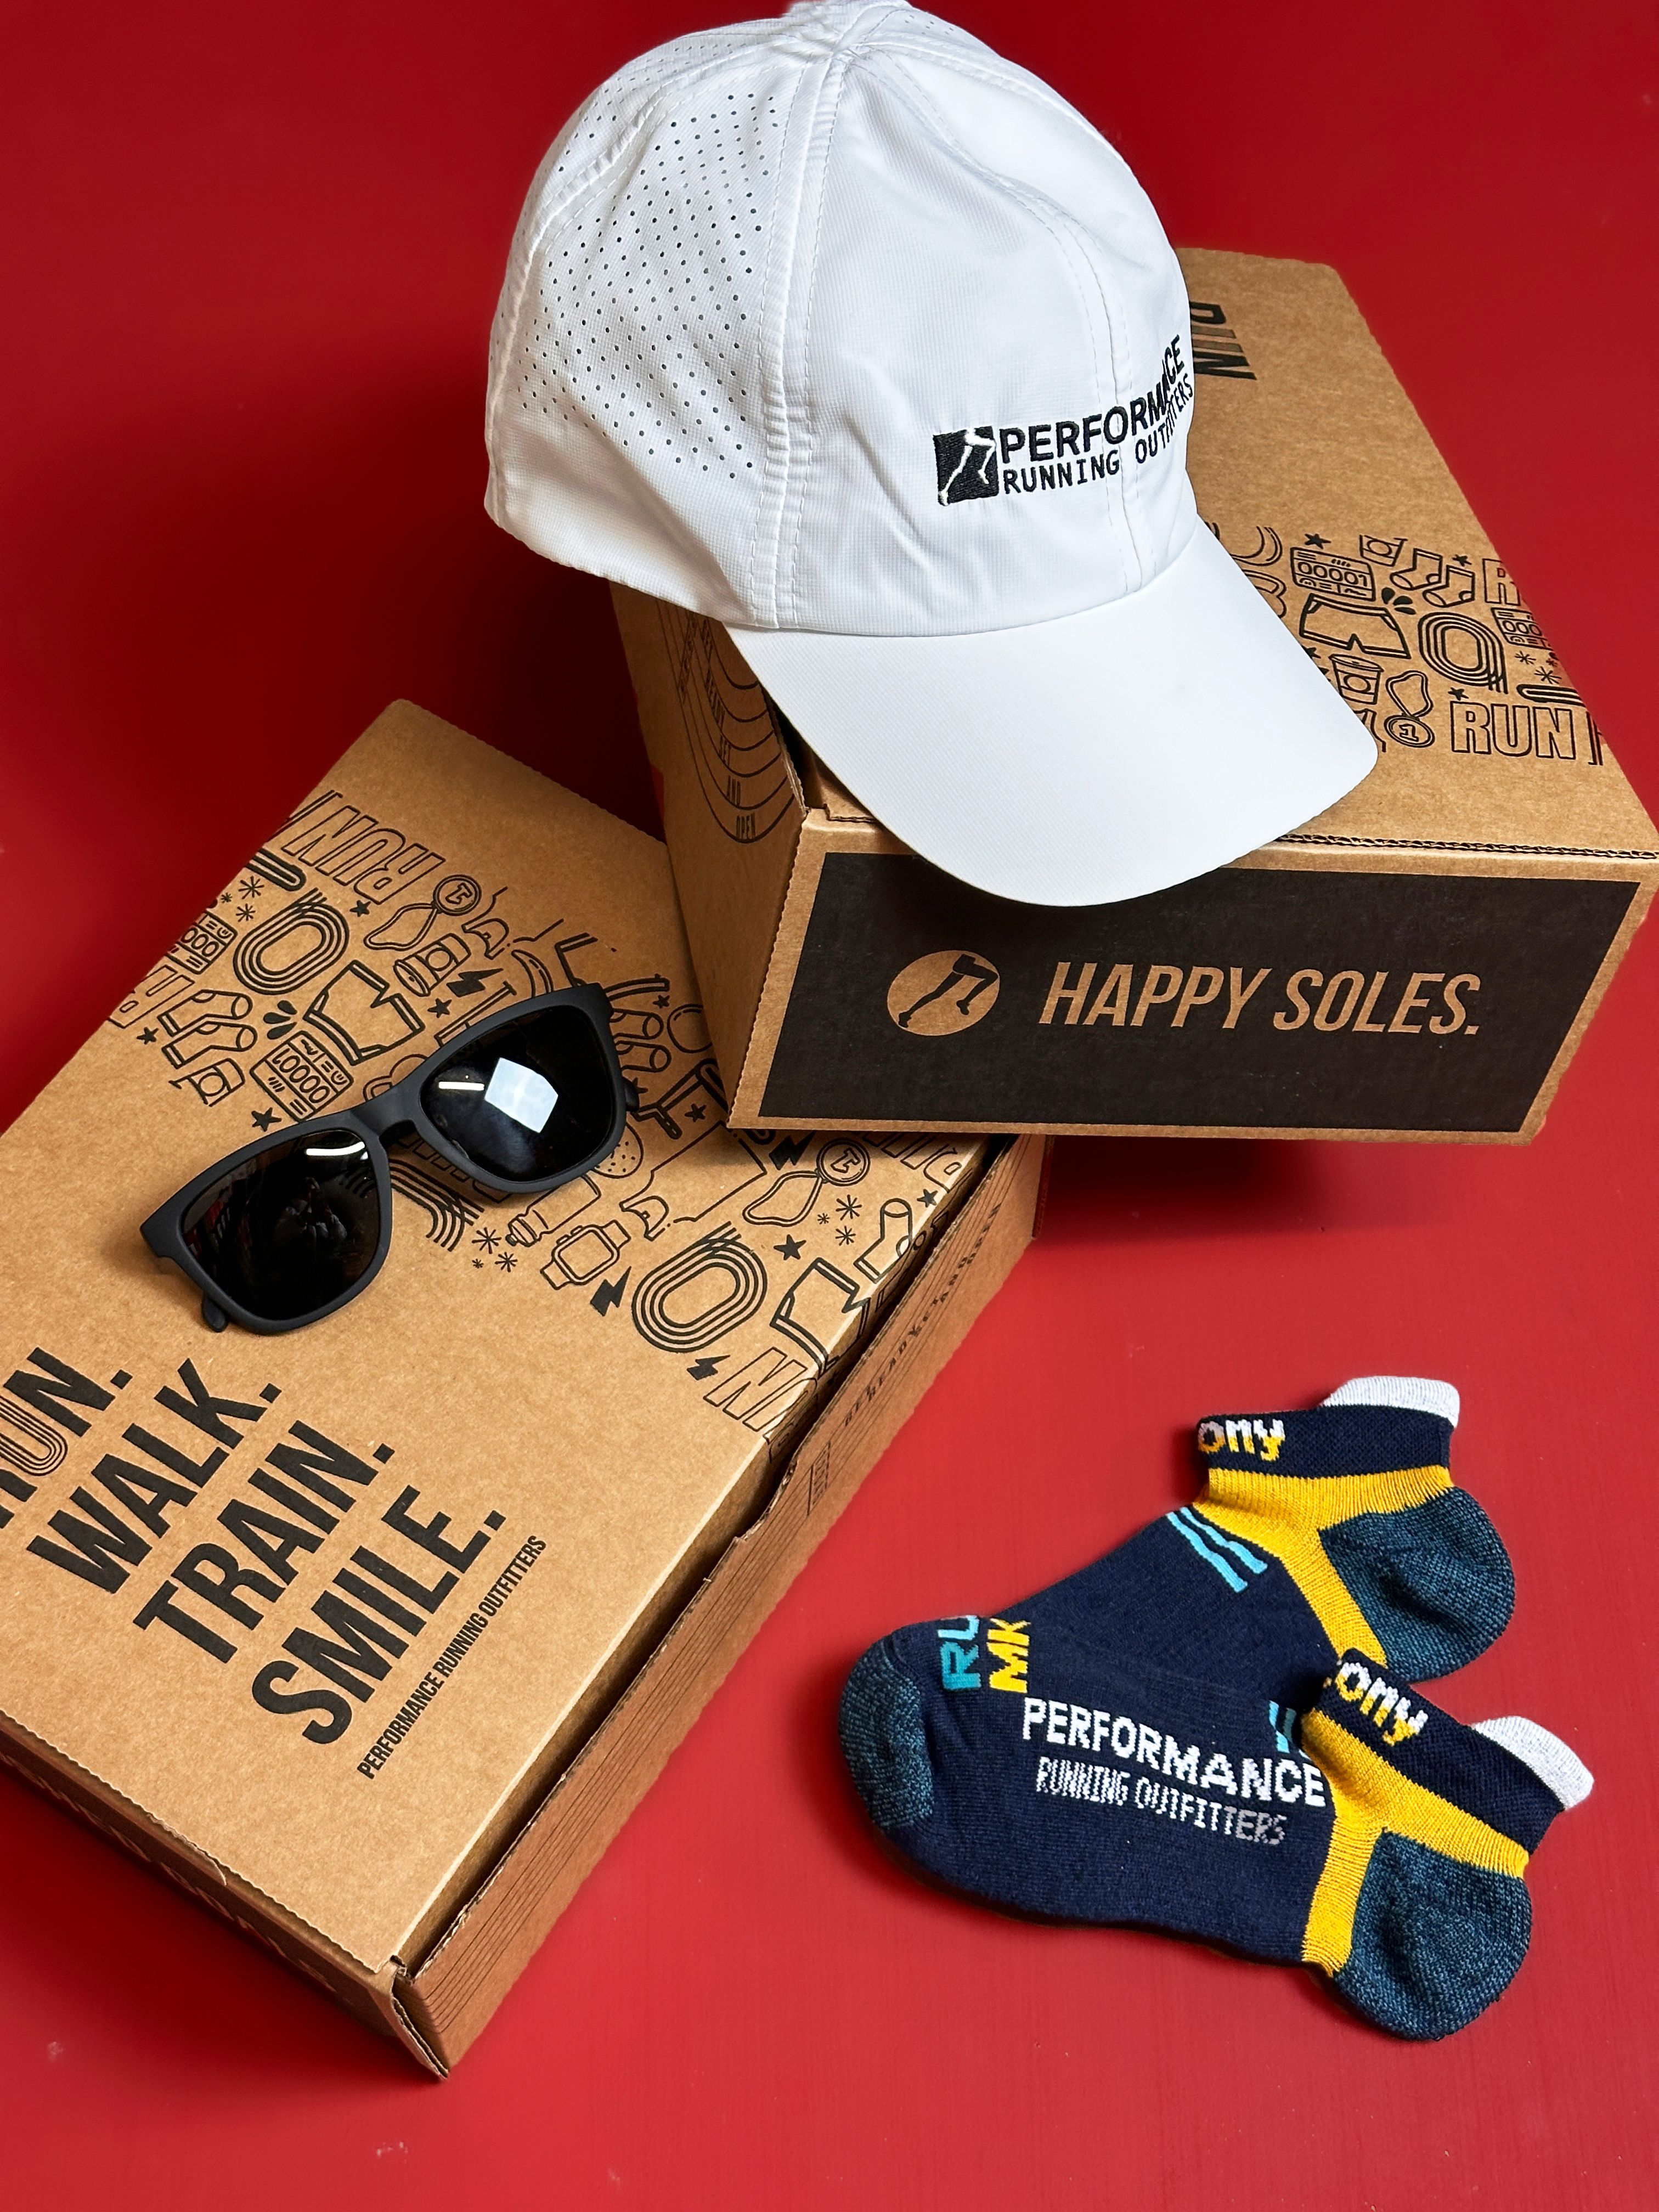 PRO running gift boxes, includes hat, socks, sunglasses, nutrition  